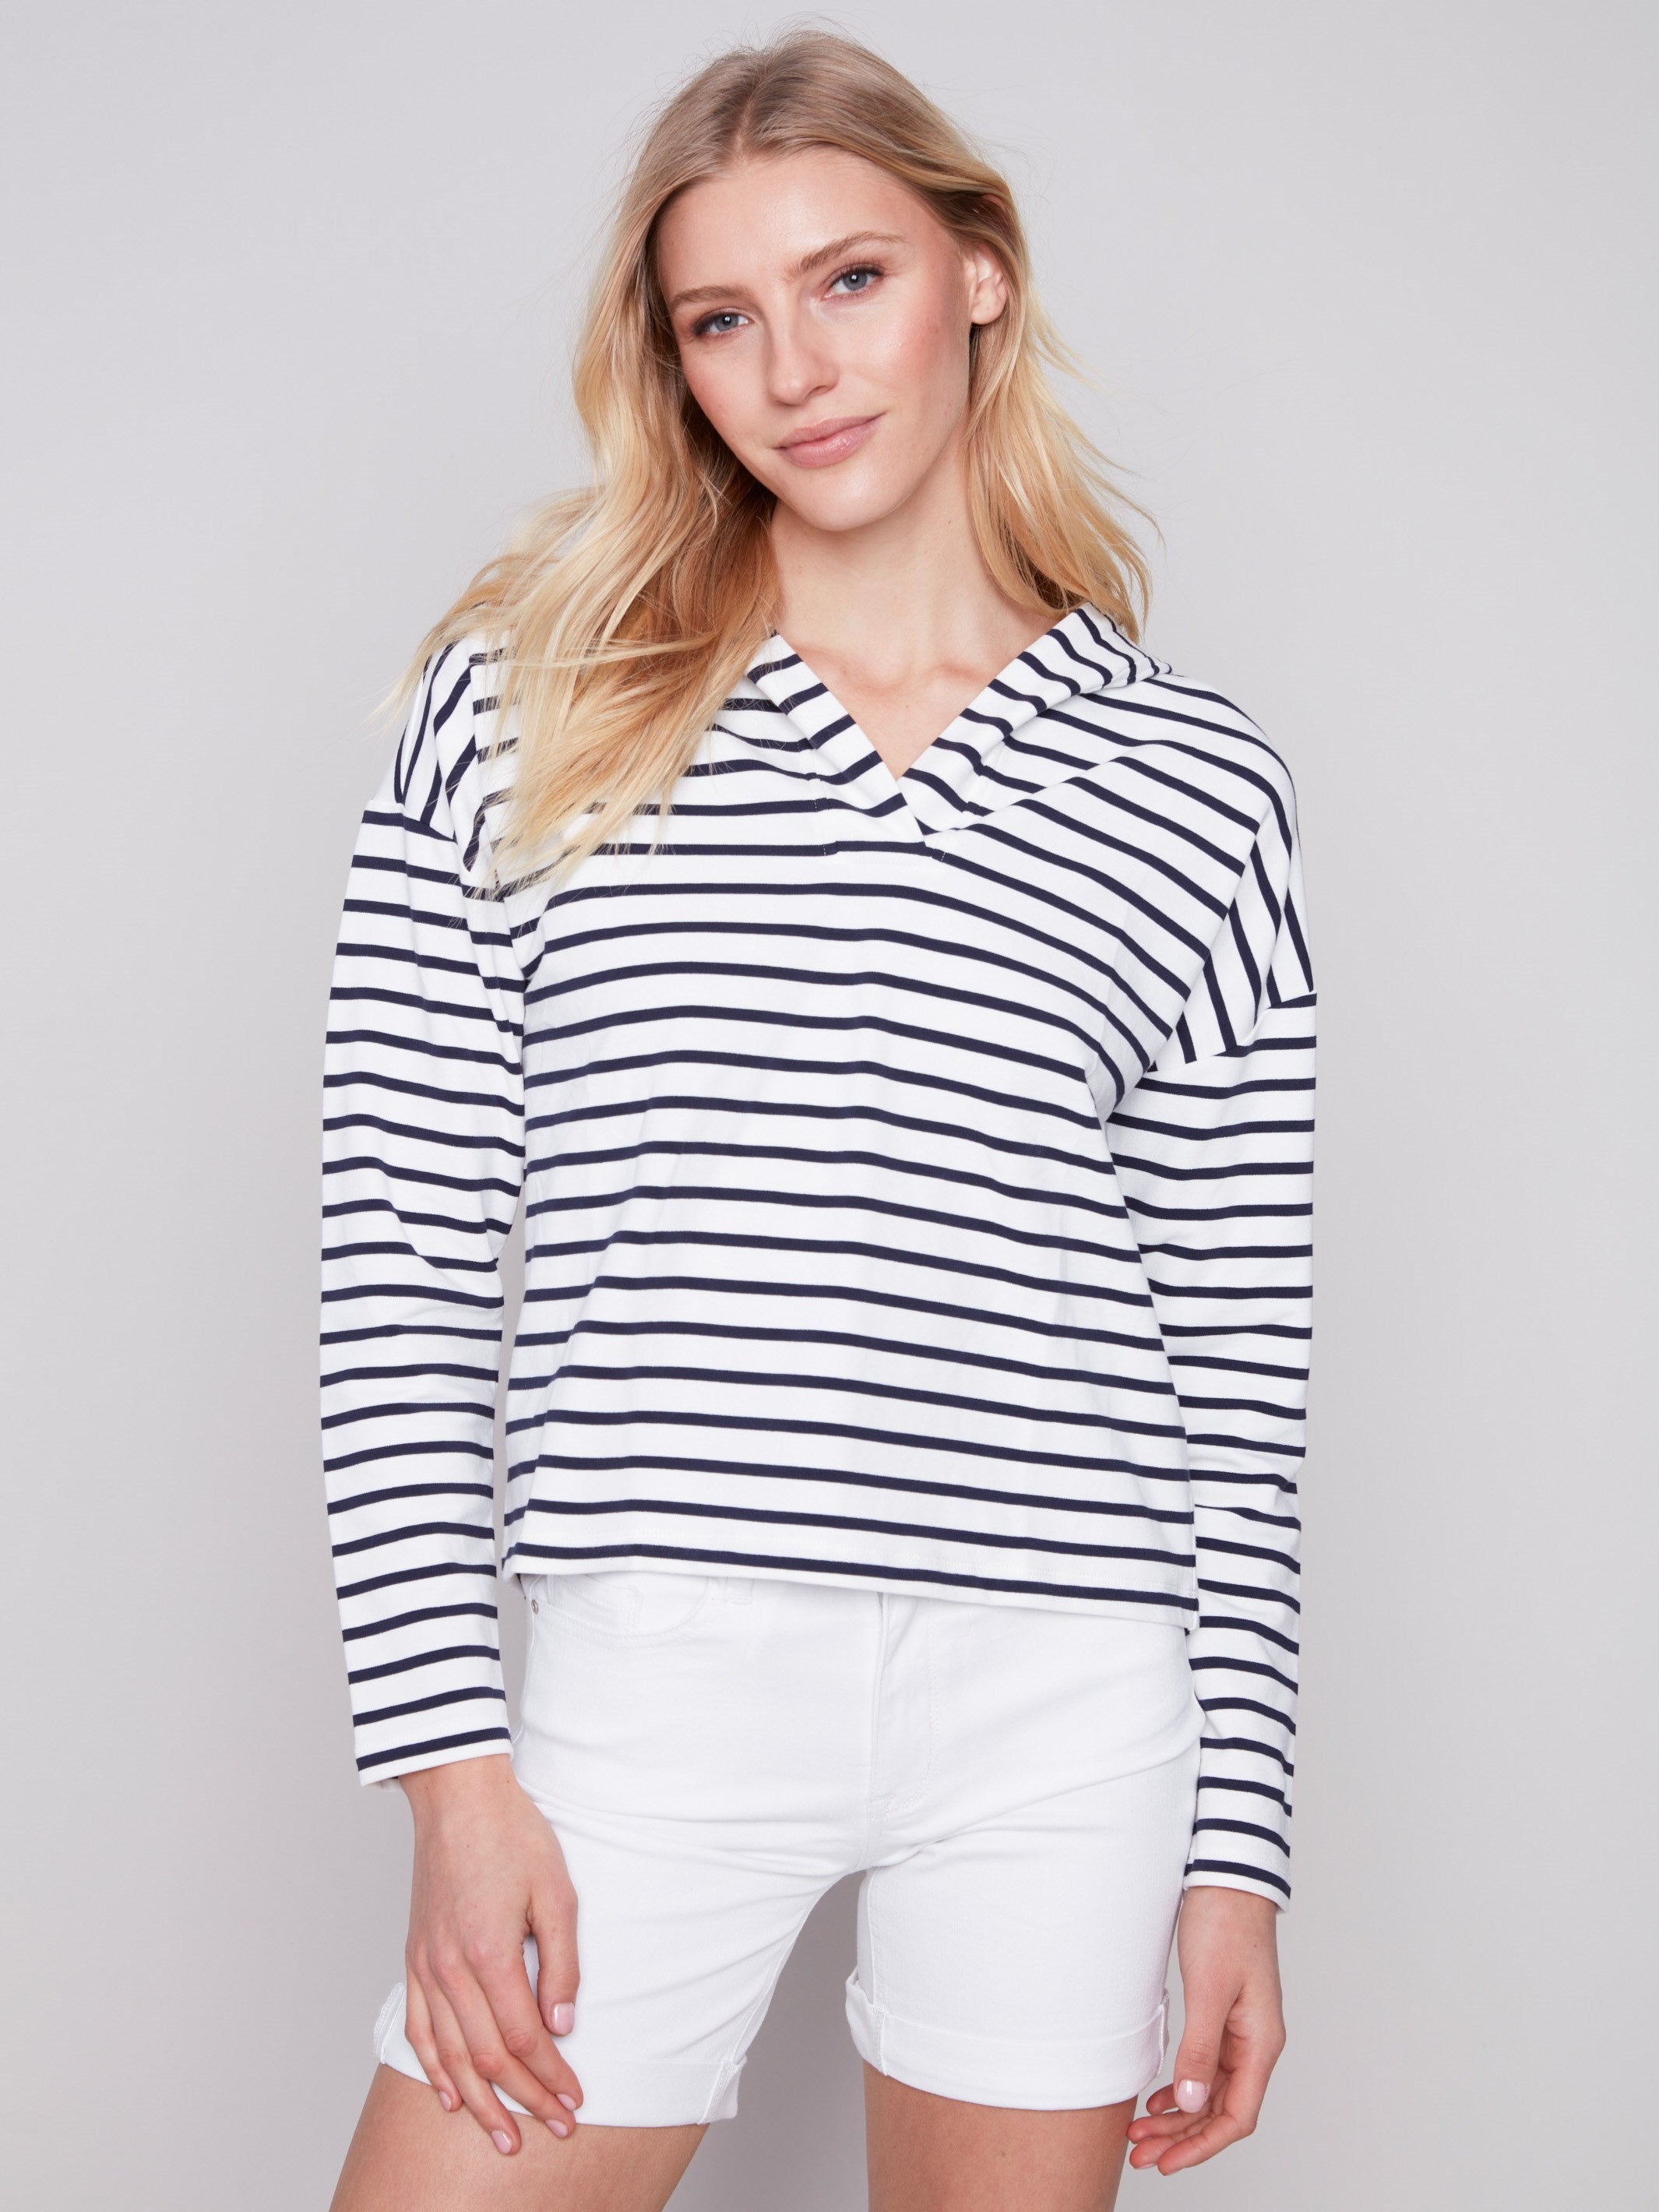 Striped V-Neck Top - Navy - Charlie B Collection Canada - Image 1